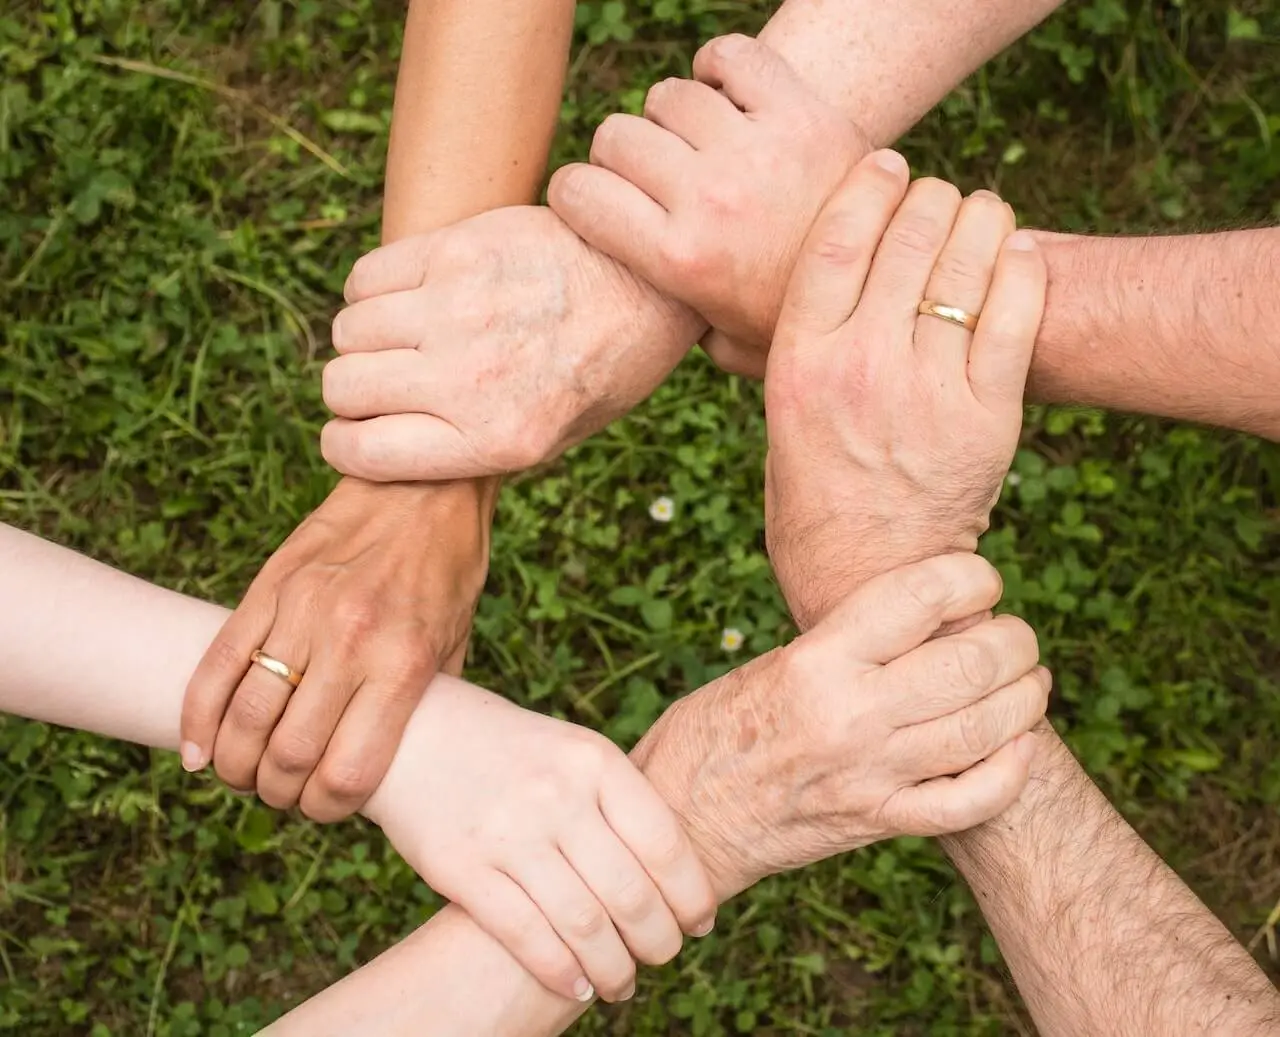 The Best CSR Ideas for Businesses Always Consider Their Stakeholders’ Welfare